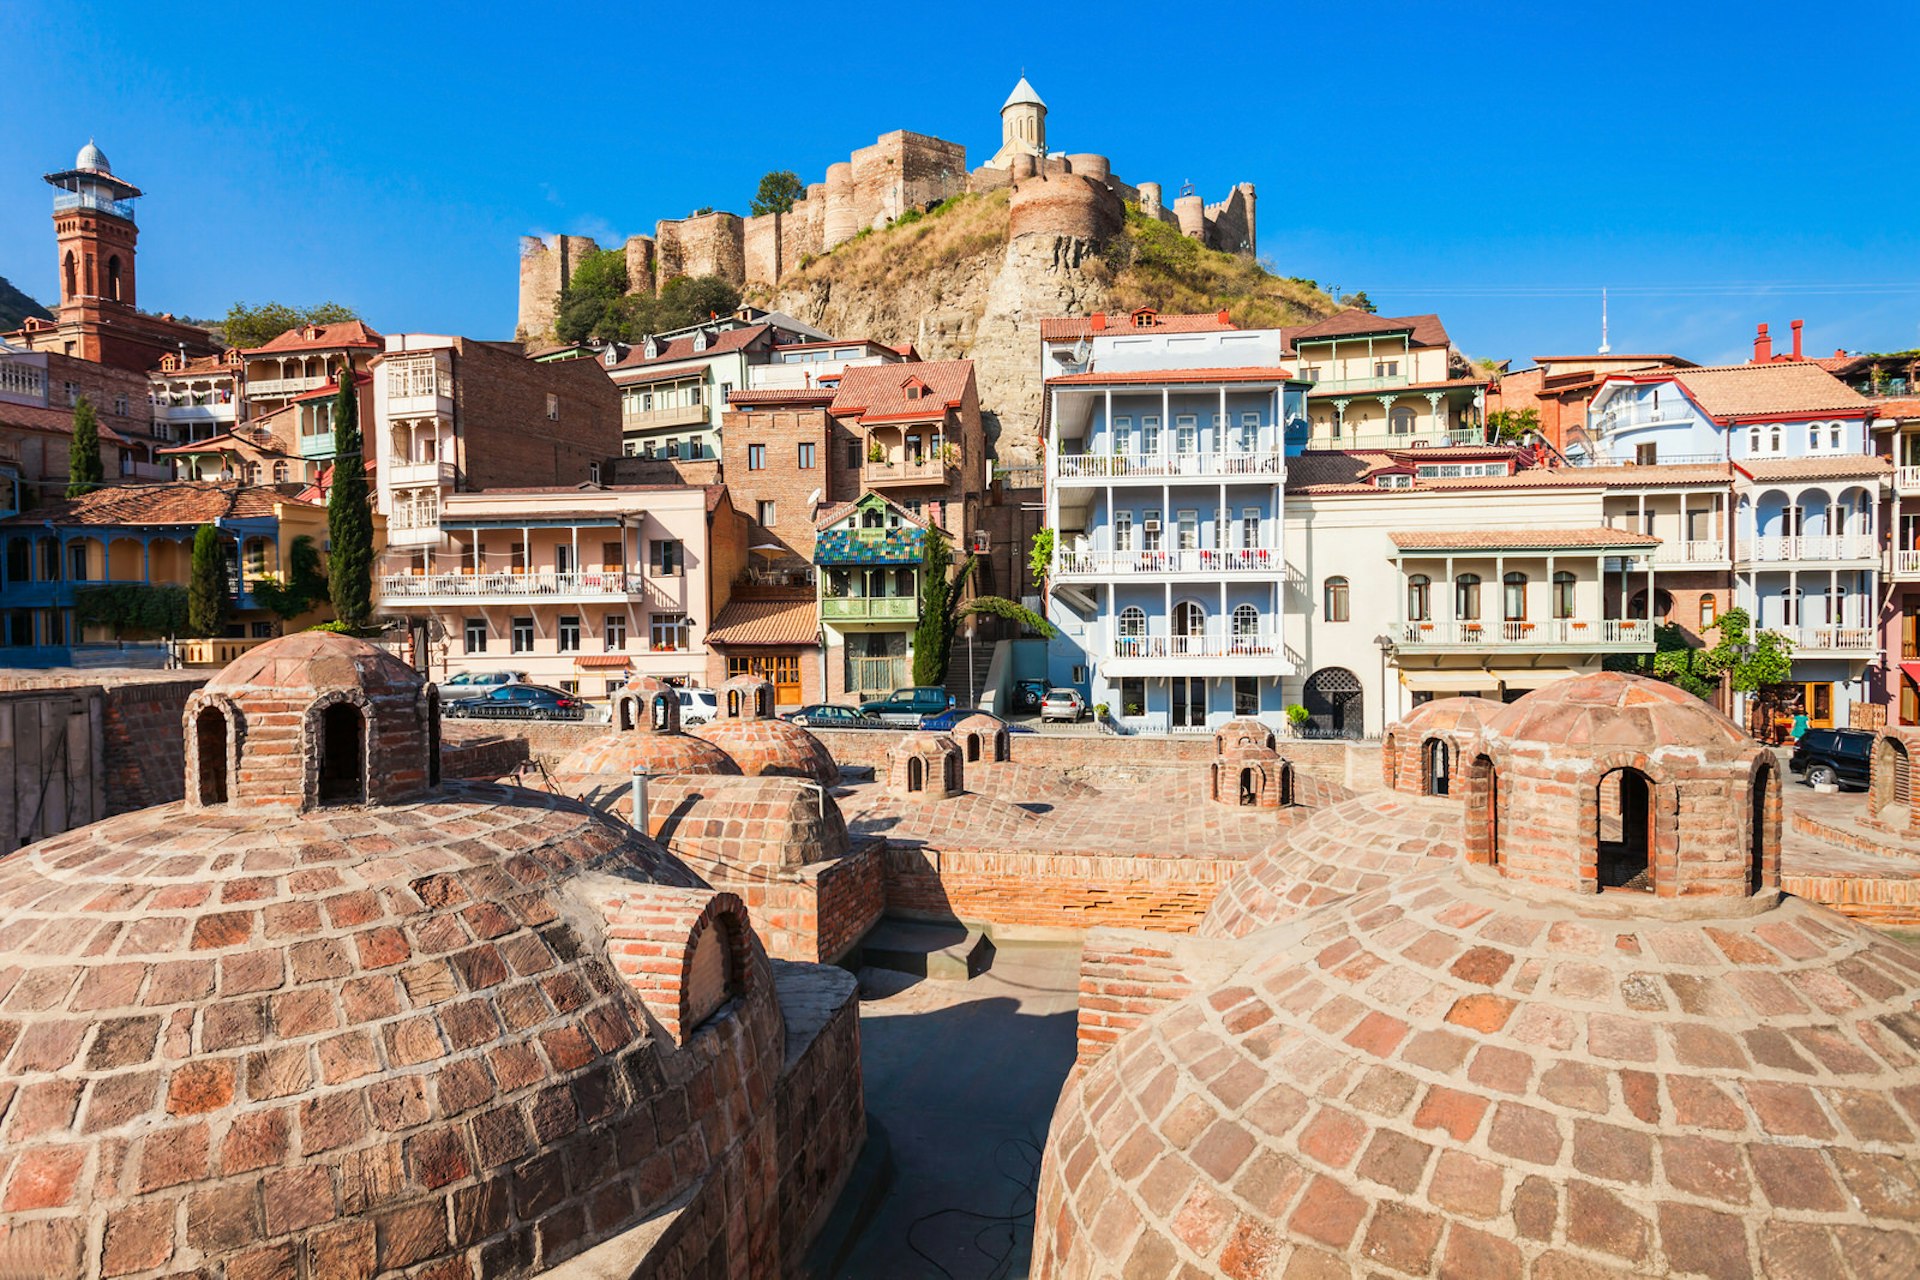 View of Tbilisi's Old Town looking up from the domed roof of the sulphur baths towards colourful houses and the hilltop Narikala Fortress